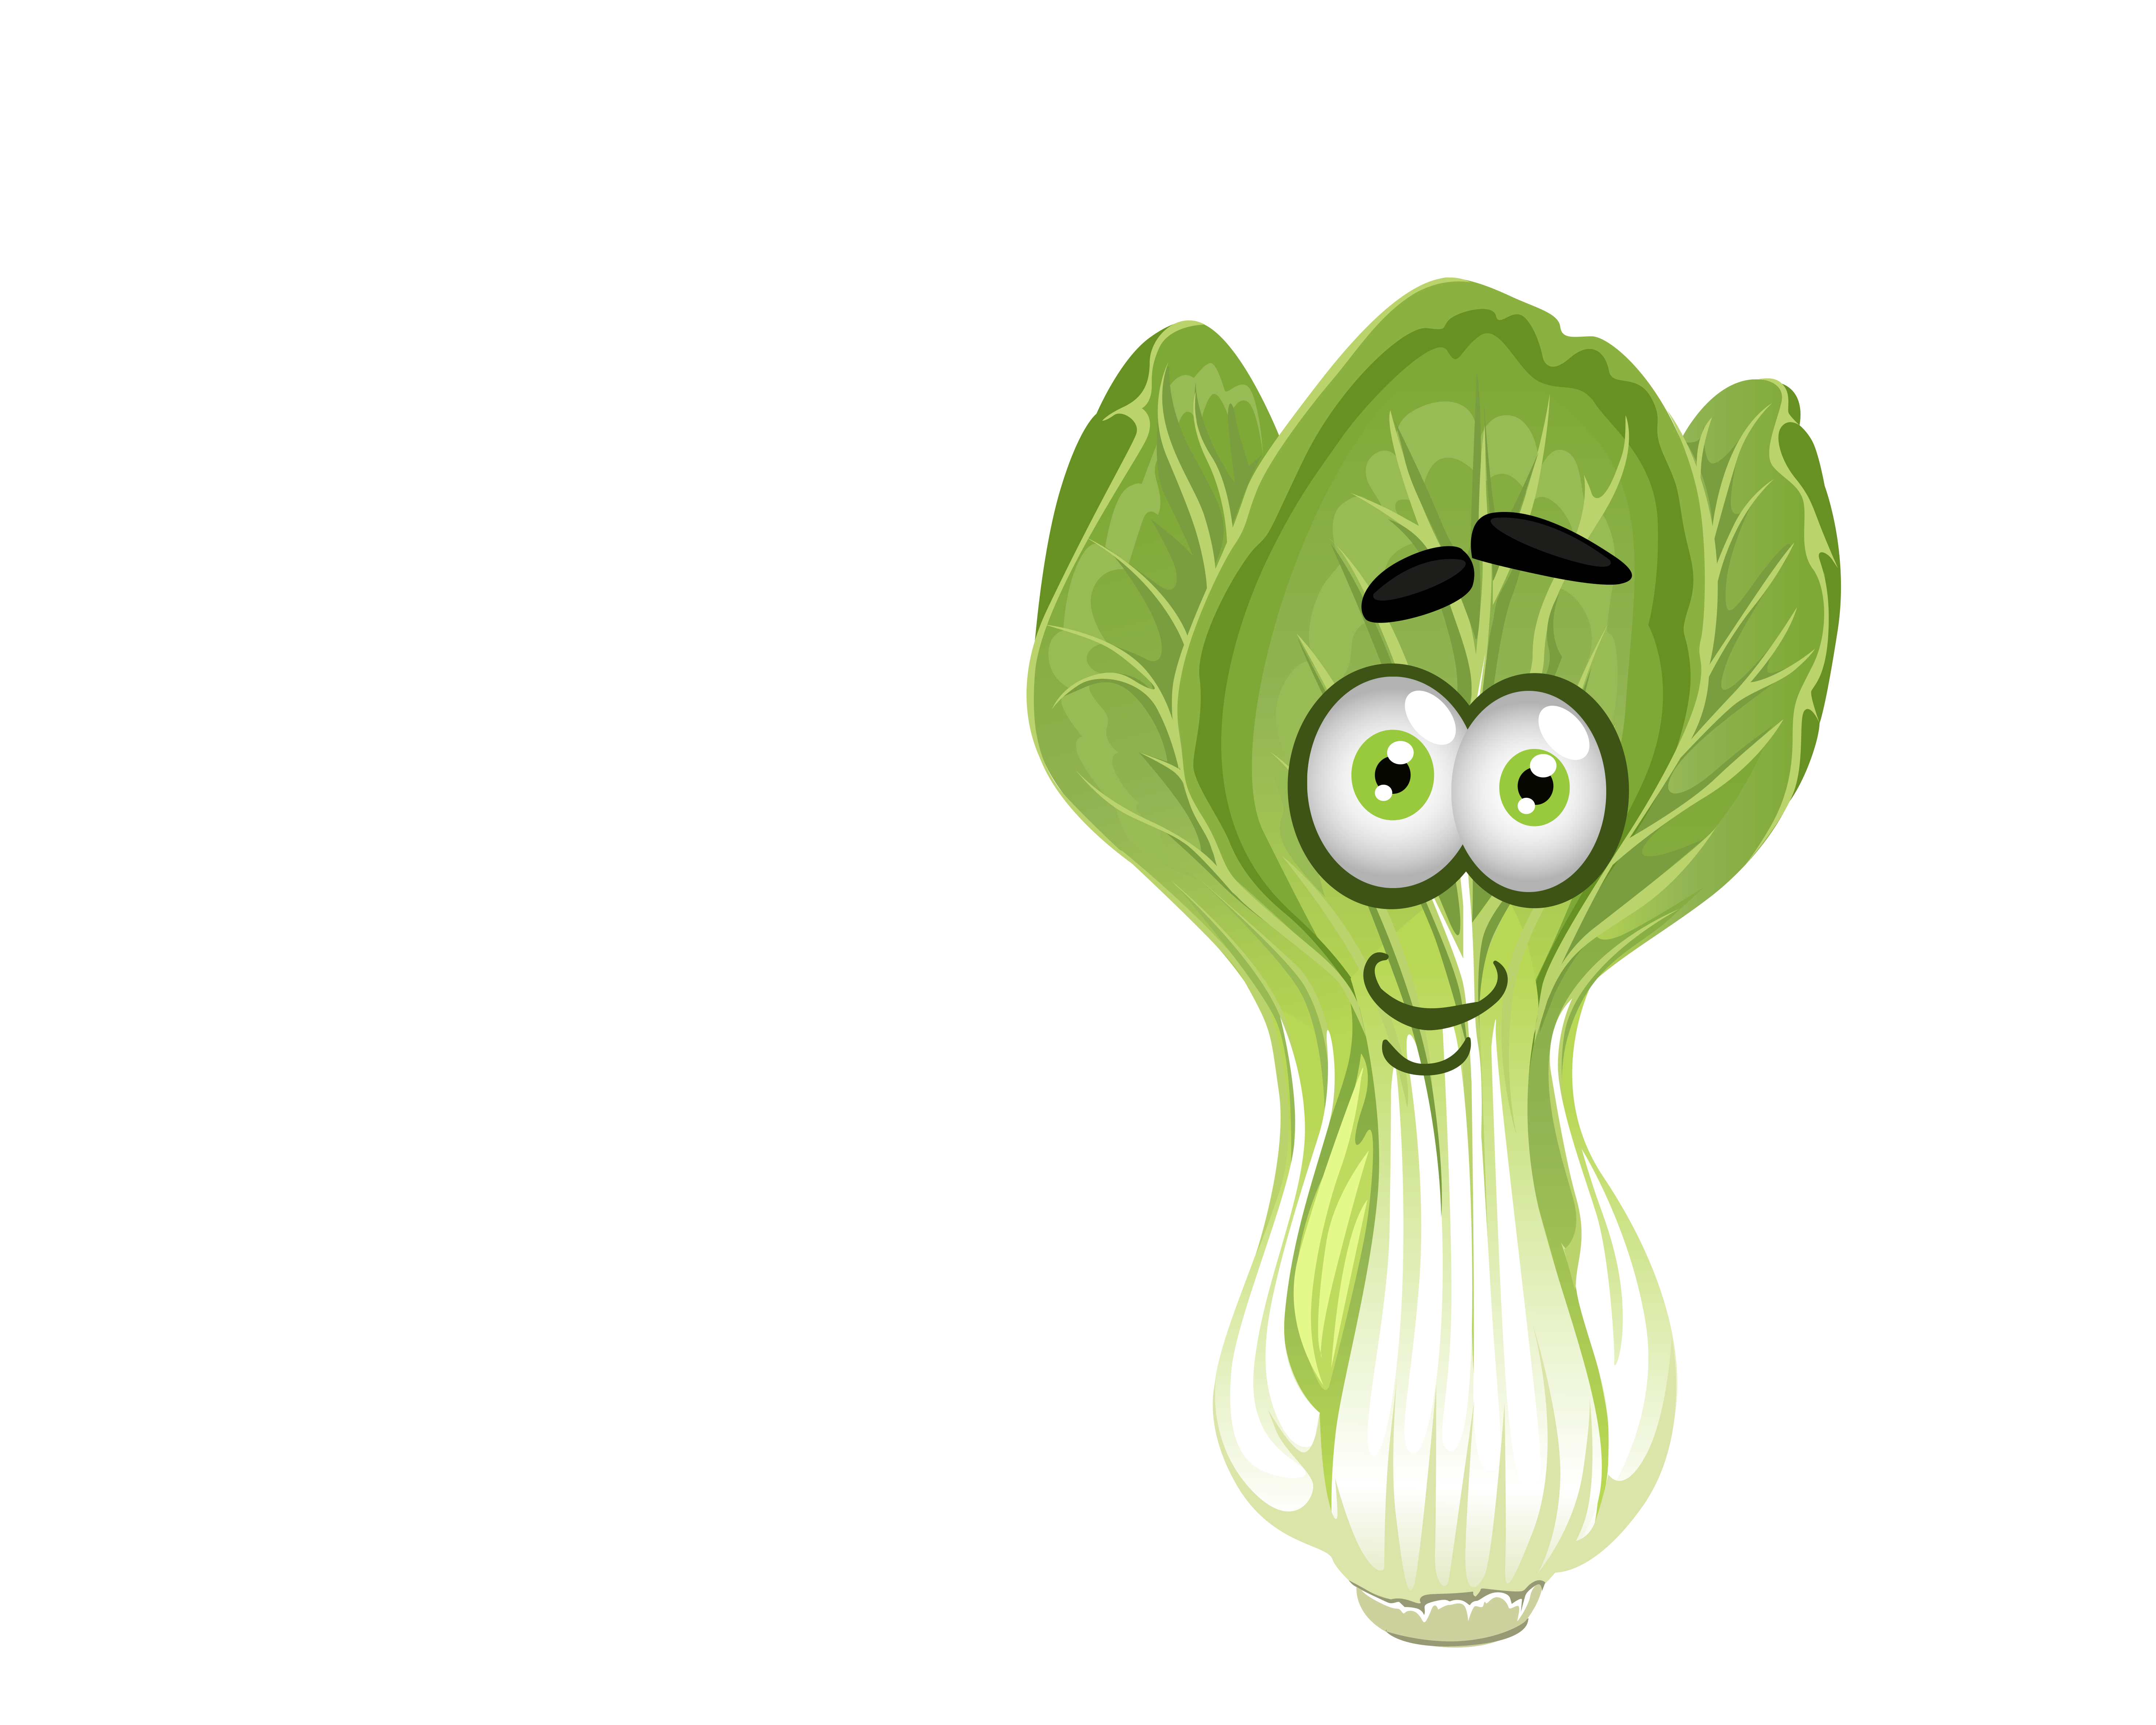 vegetables clipart character